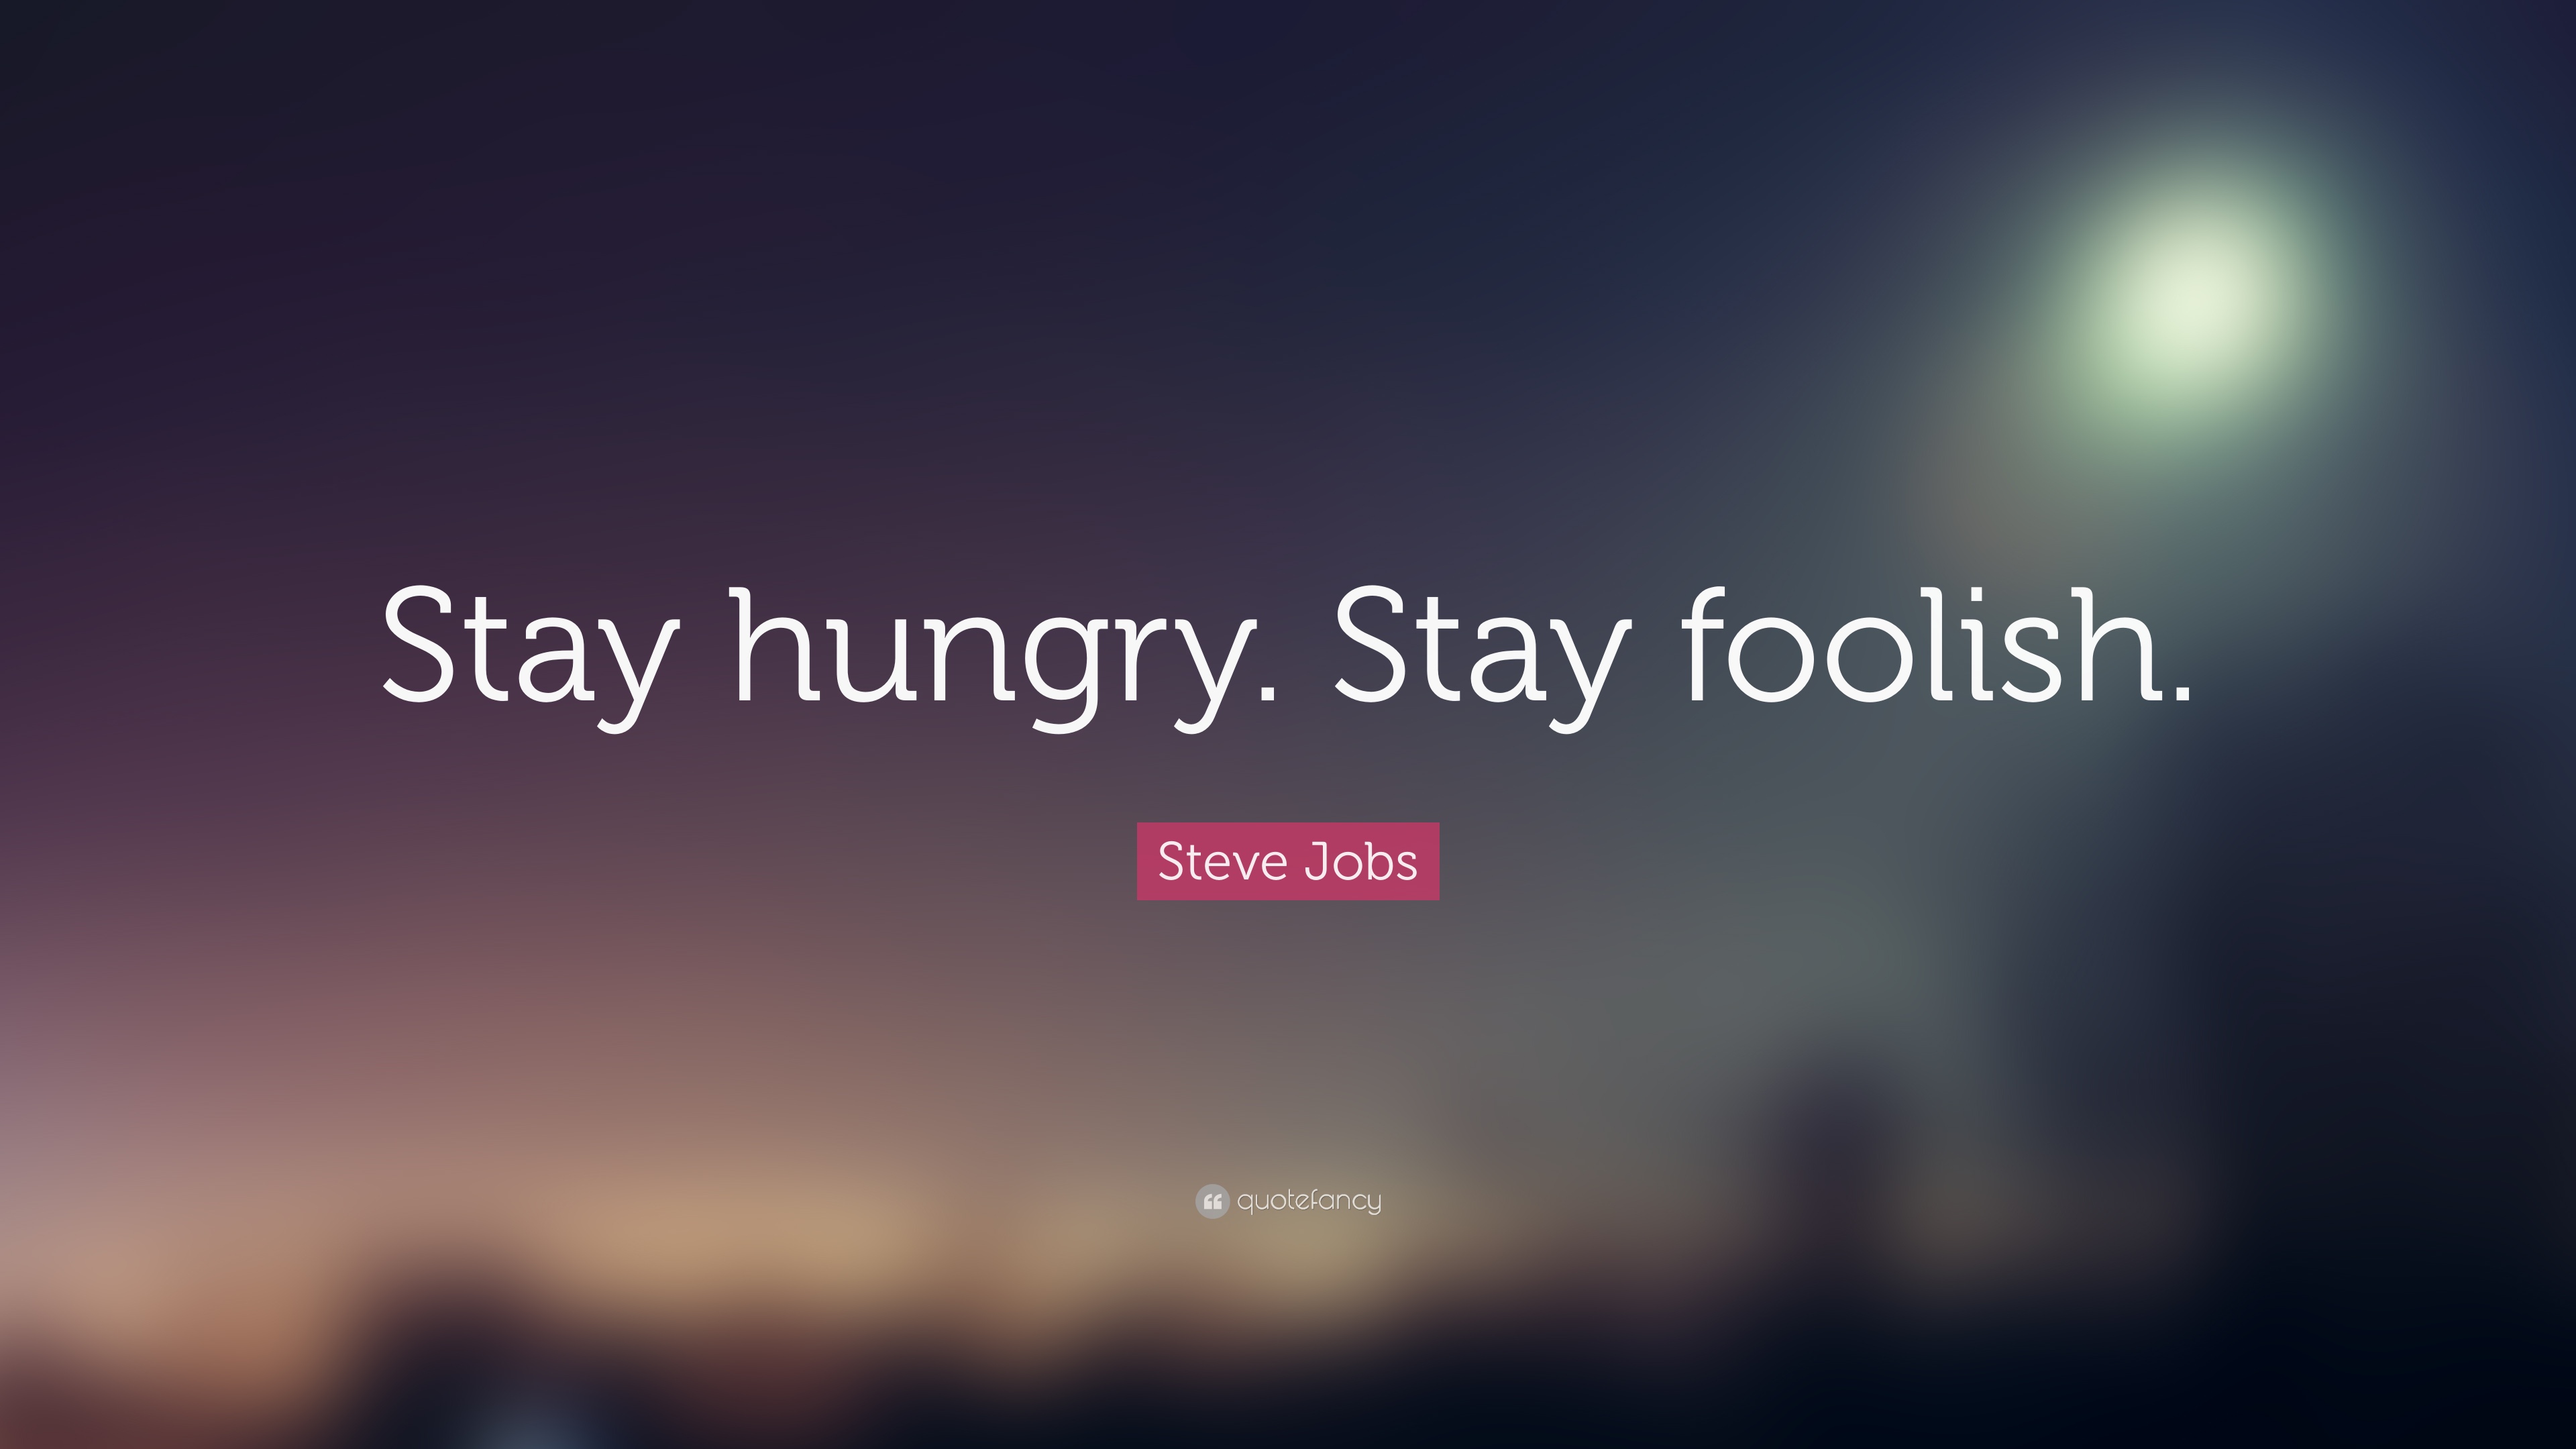 Steve Jobs Quote Stay hungry. Stay foolish. 19 wallpapers